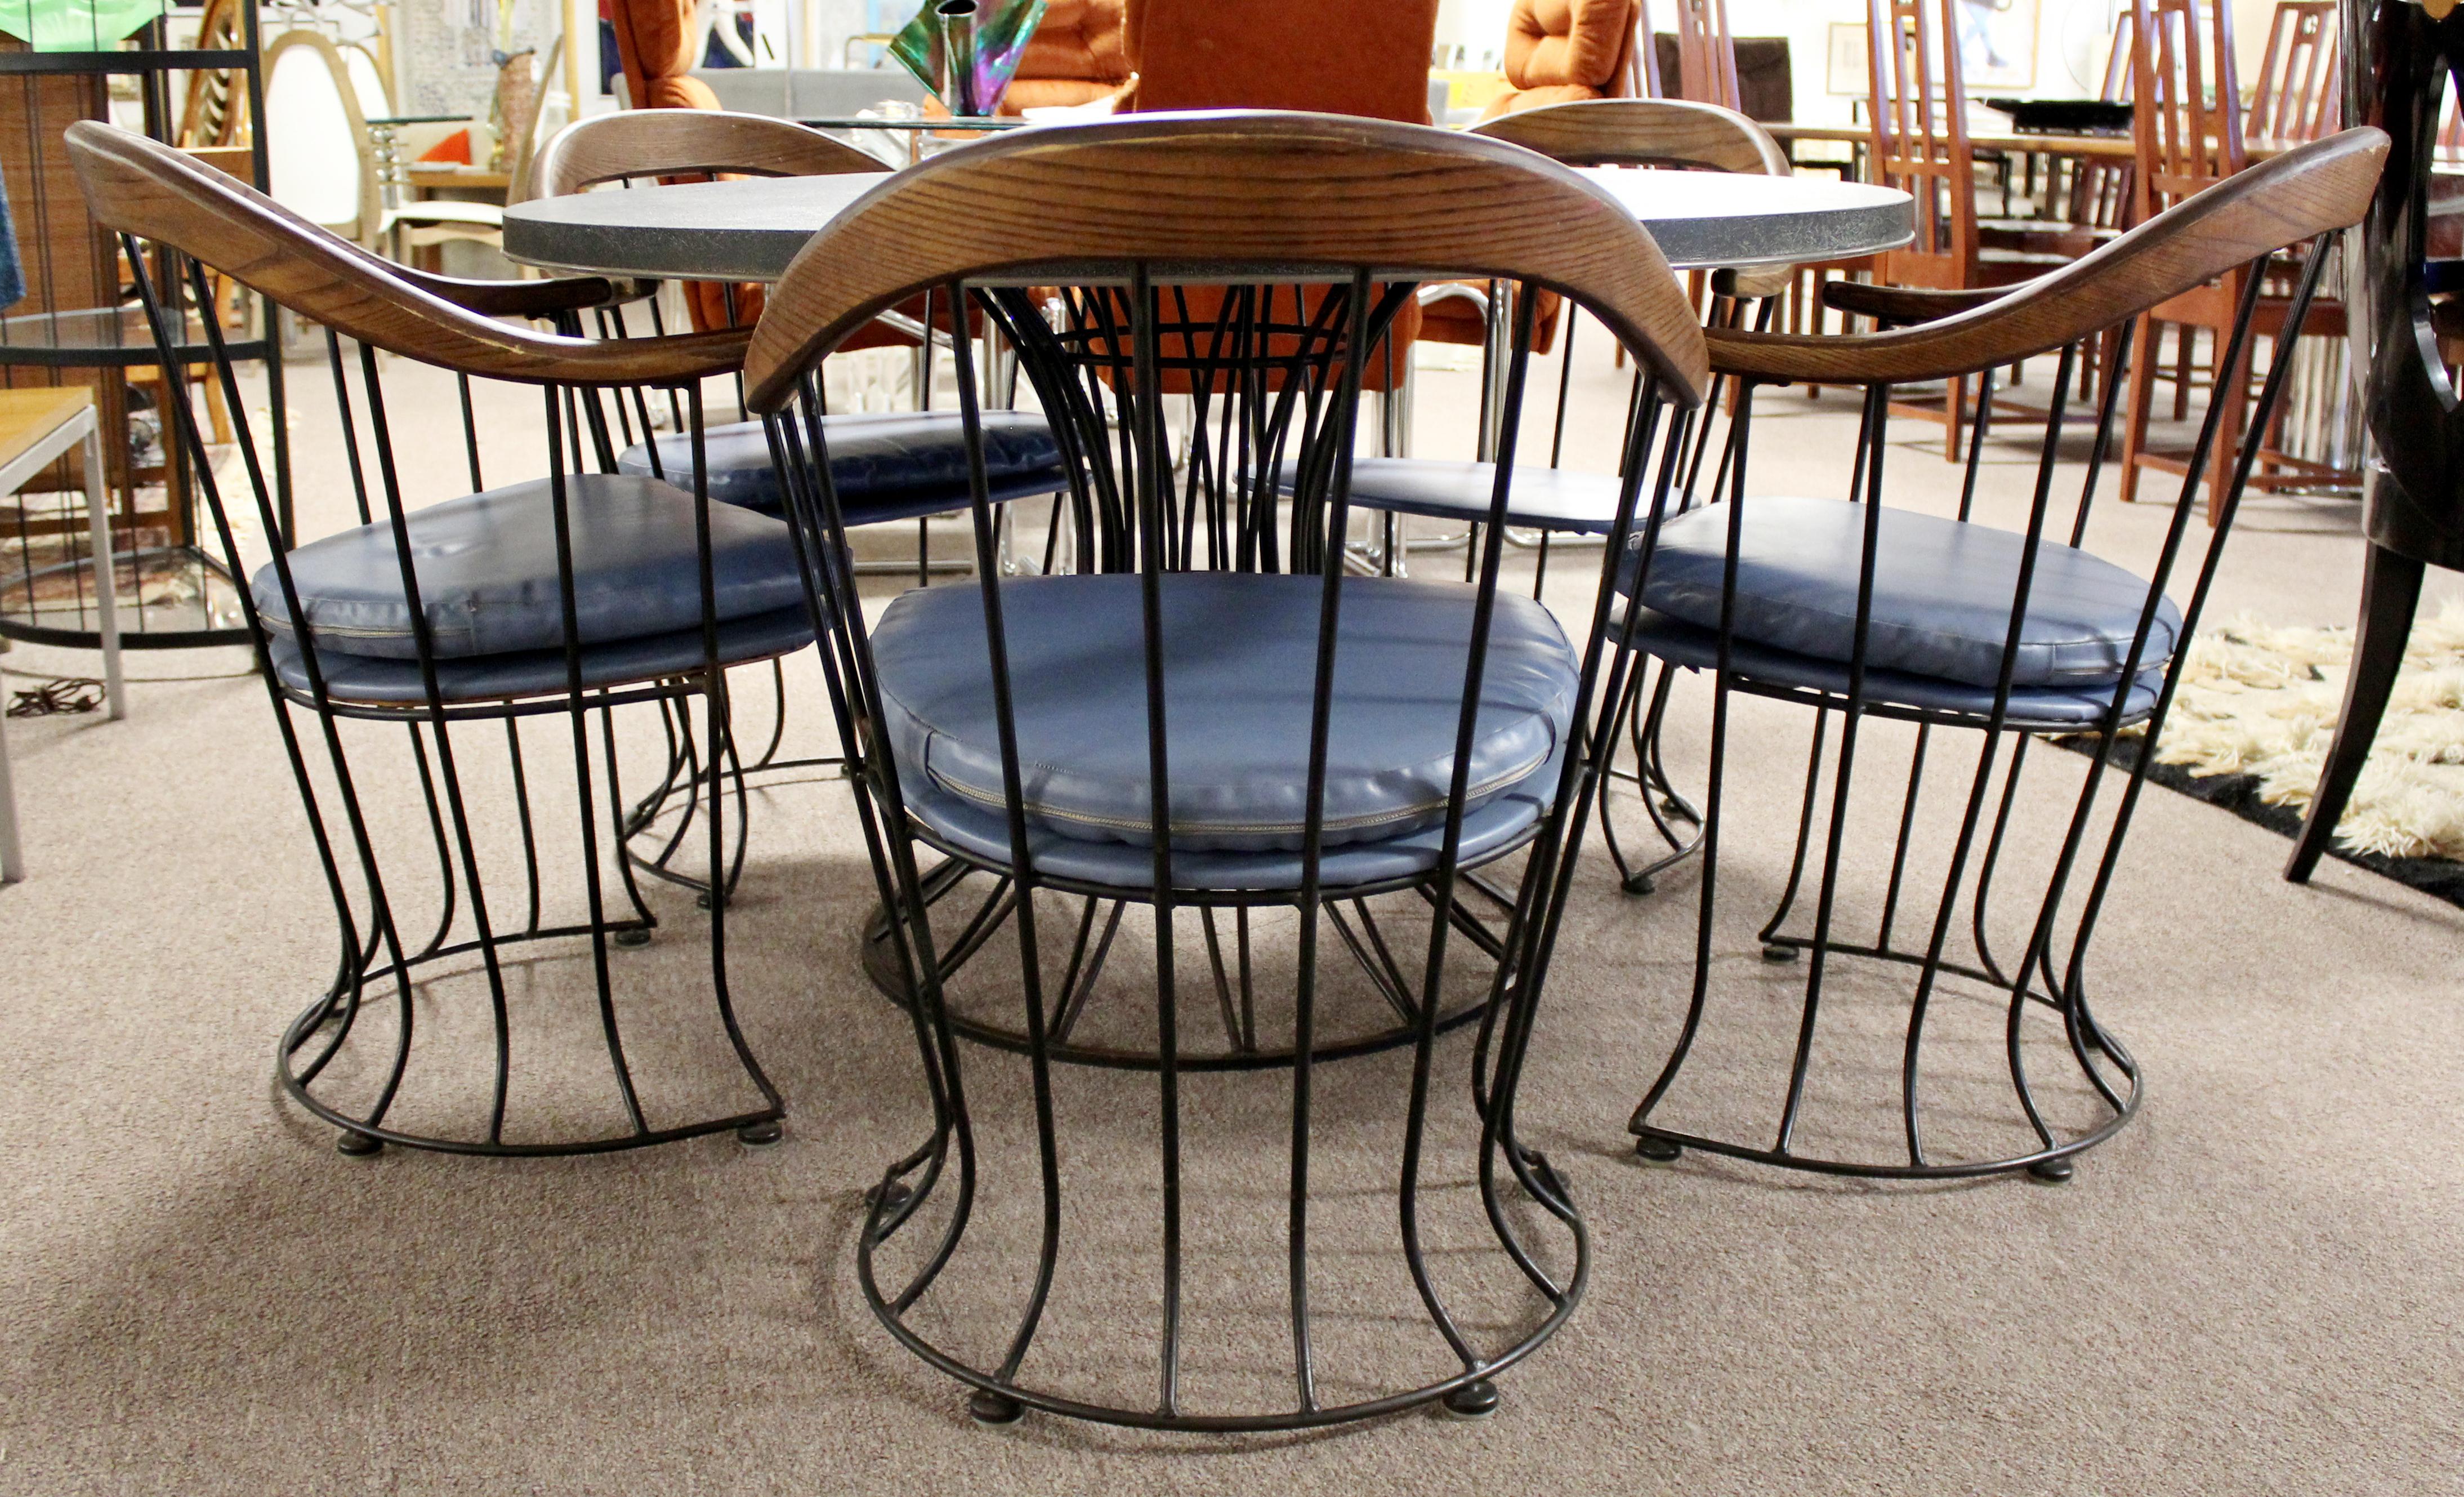 For your consideration is a brilliant, indoor/outdoor patio set of five, curved, wood topped armchairs and matching dining table with a slate top, by Russell Woodard, circa 1960s. In vintage condition. The dimensions of the chairs are 24